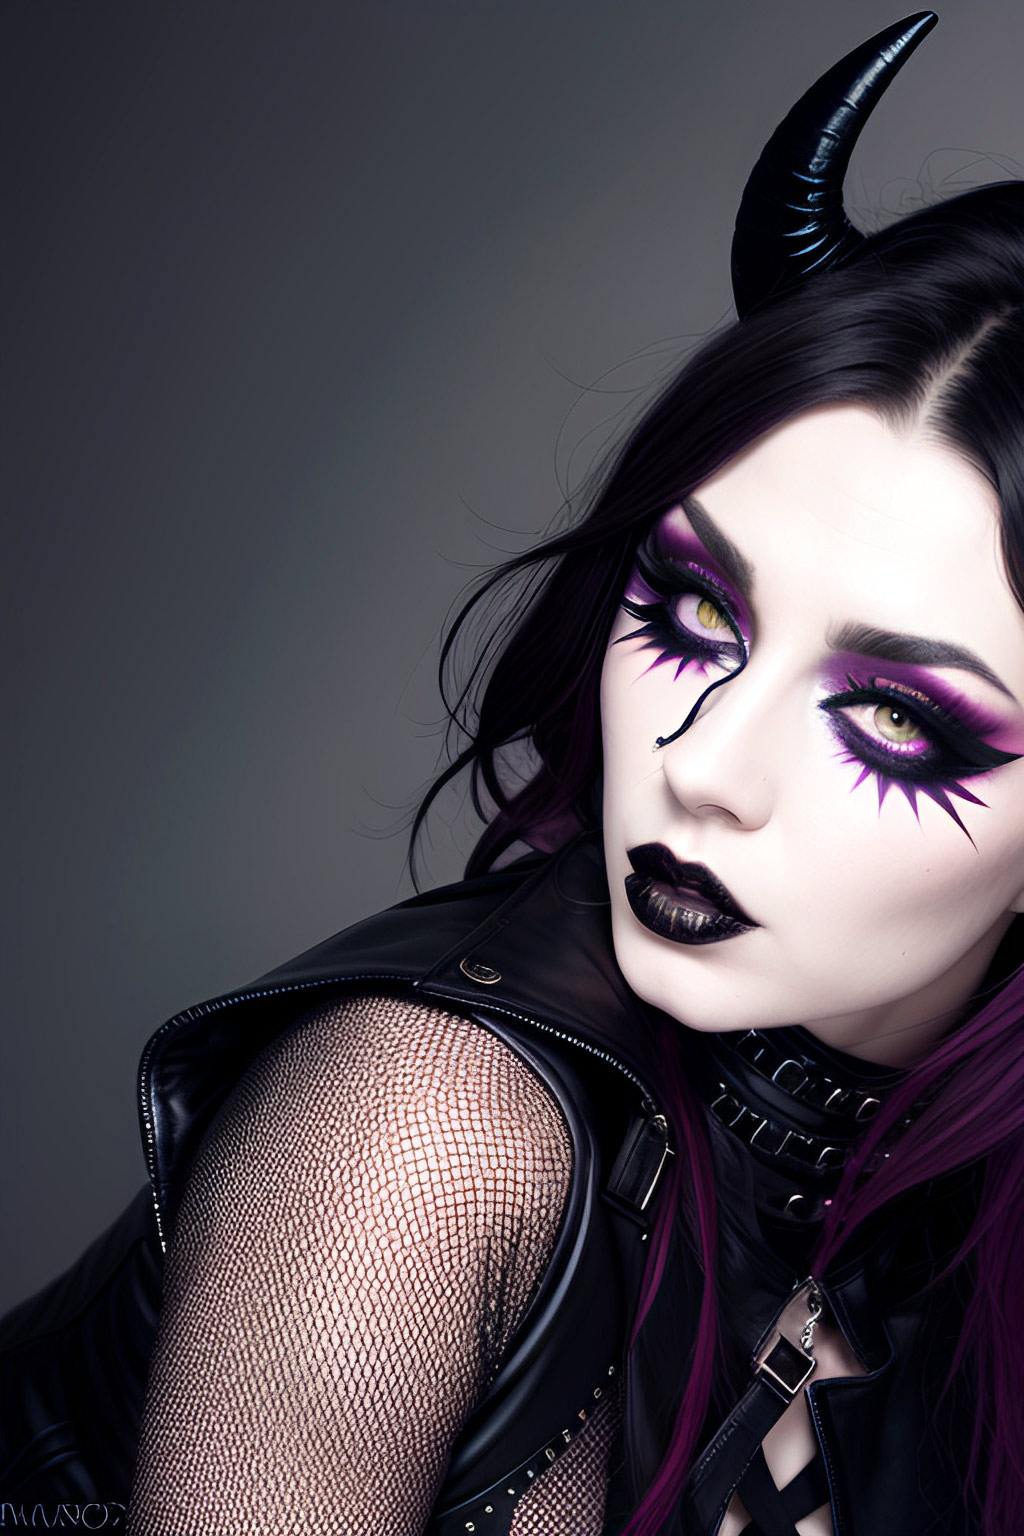 A horned woman with purple hair and black makeup